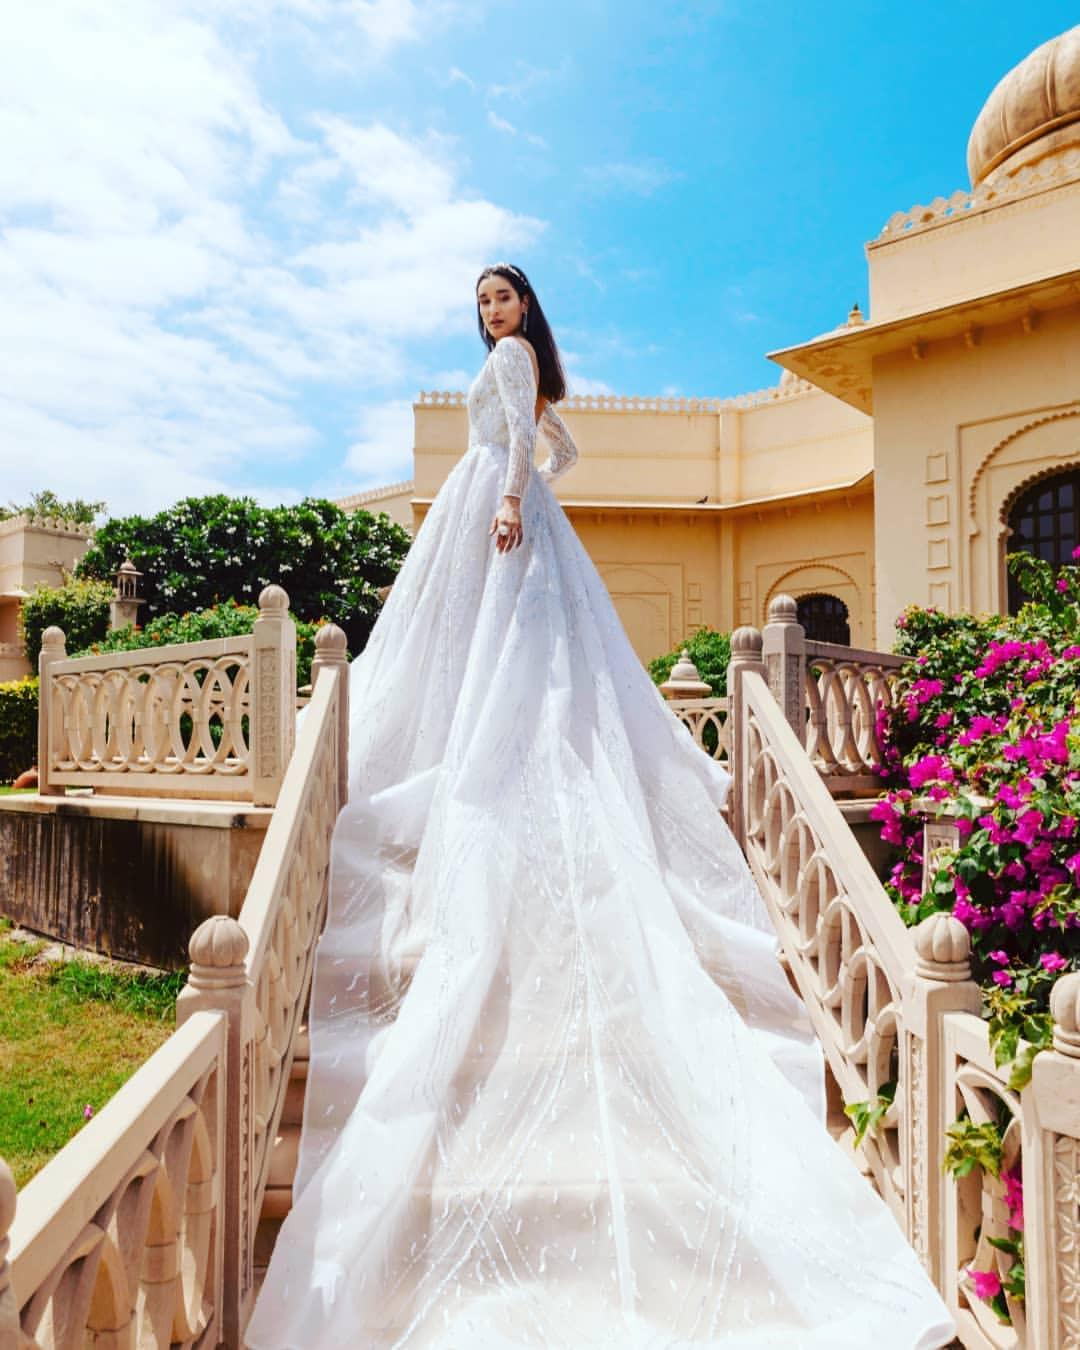 Princess Bridal Gown - Is This Style The Best Option For You?-mncb.edu.vn